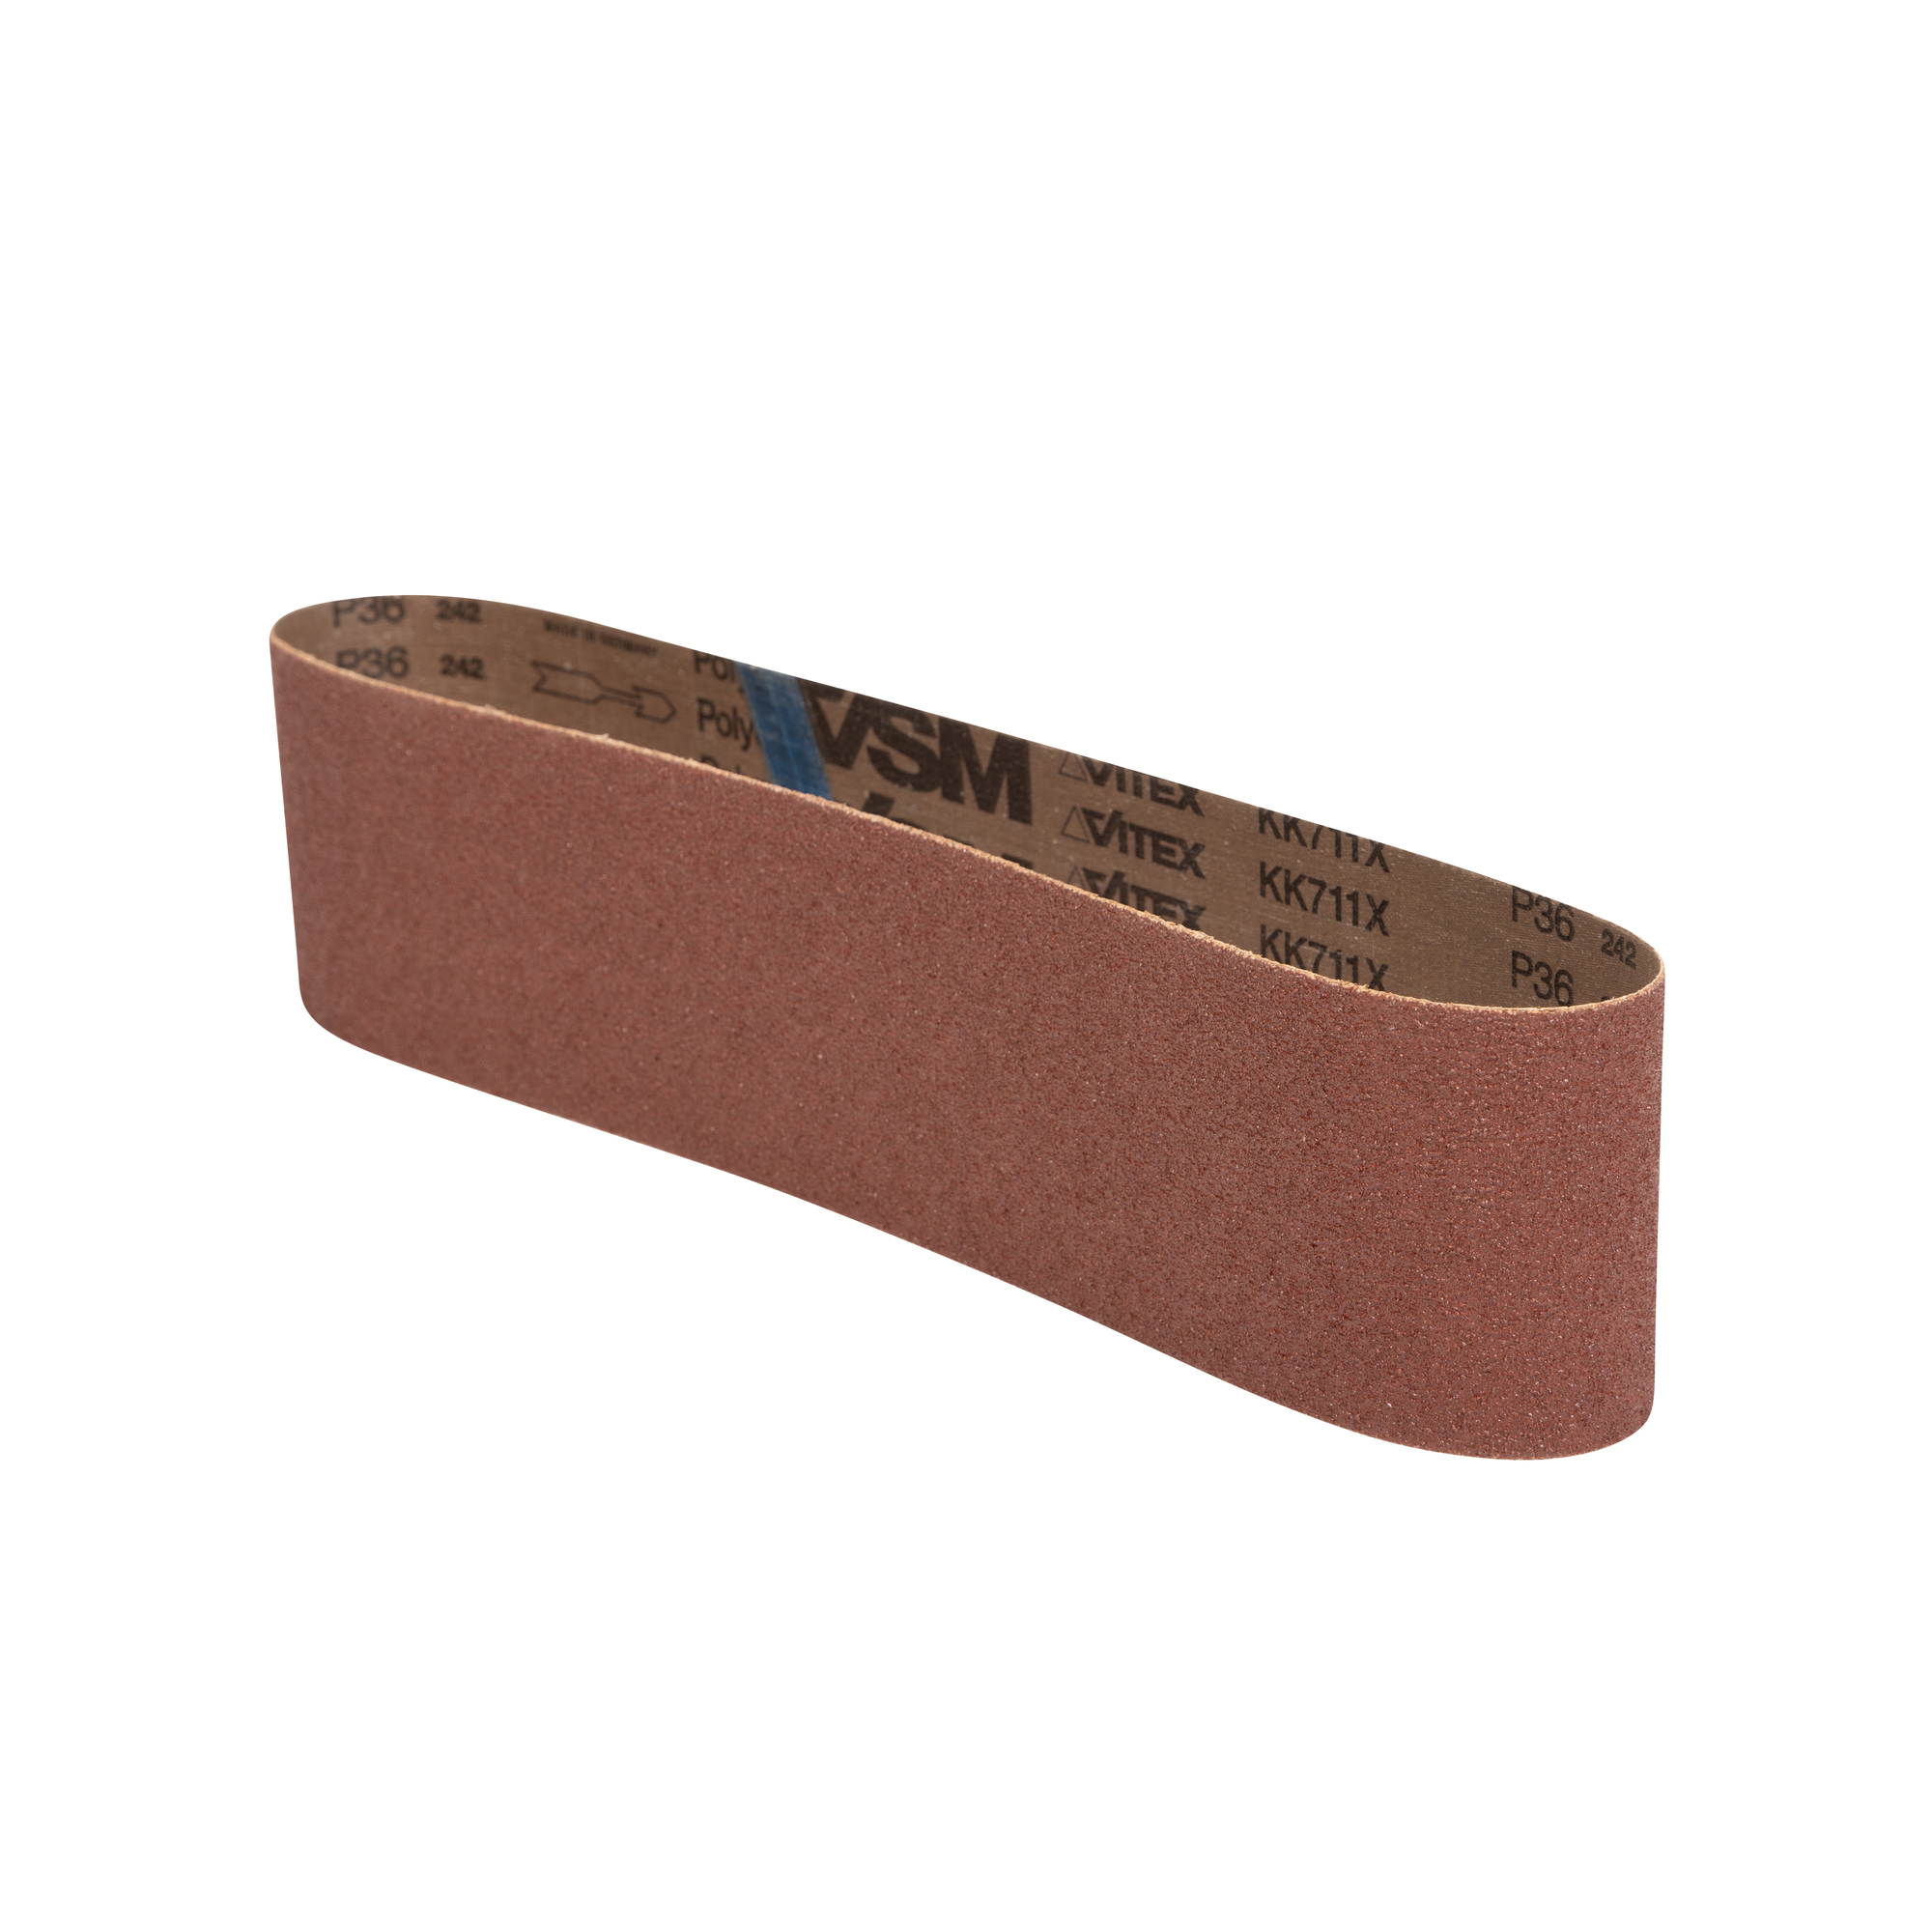 JET, Sand Paper, Pieces (qty.) 3 Grit 40 Length 36 in, Model 577533